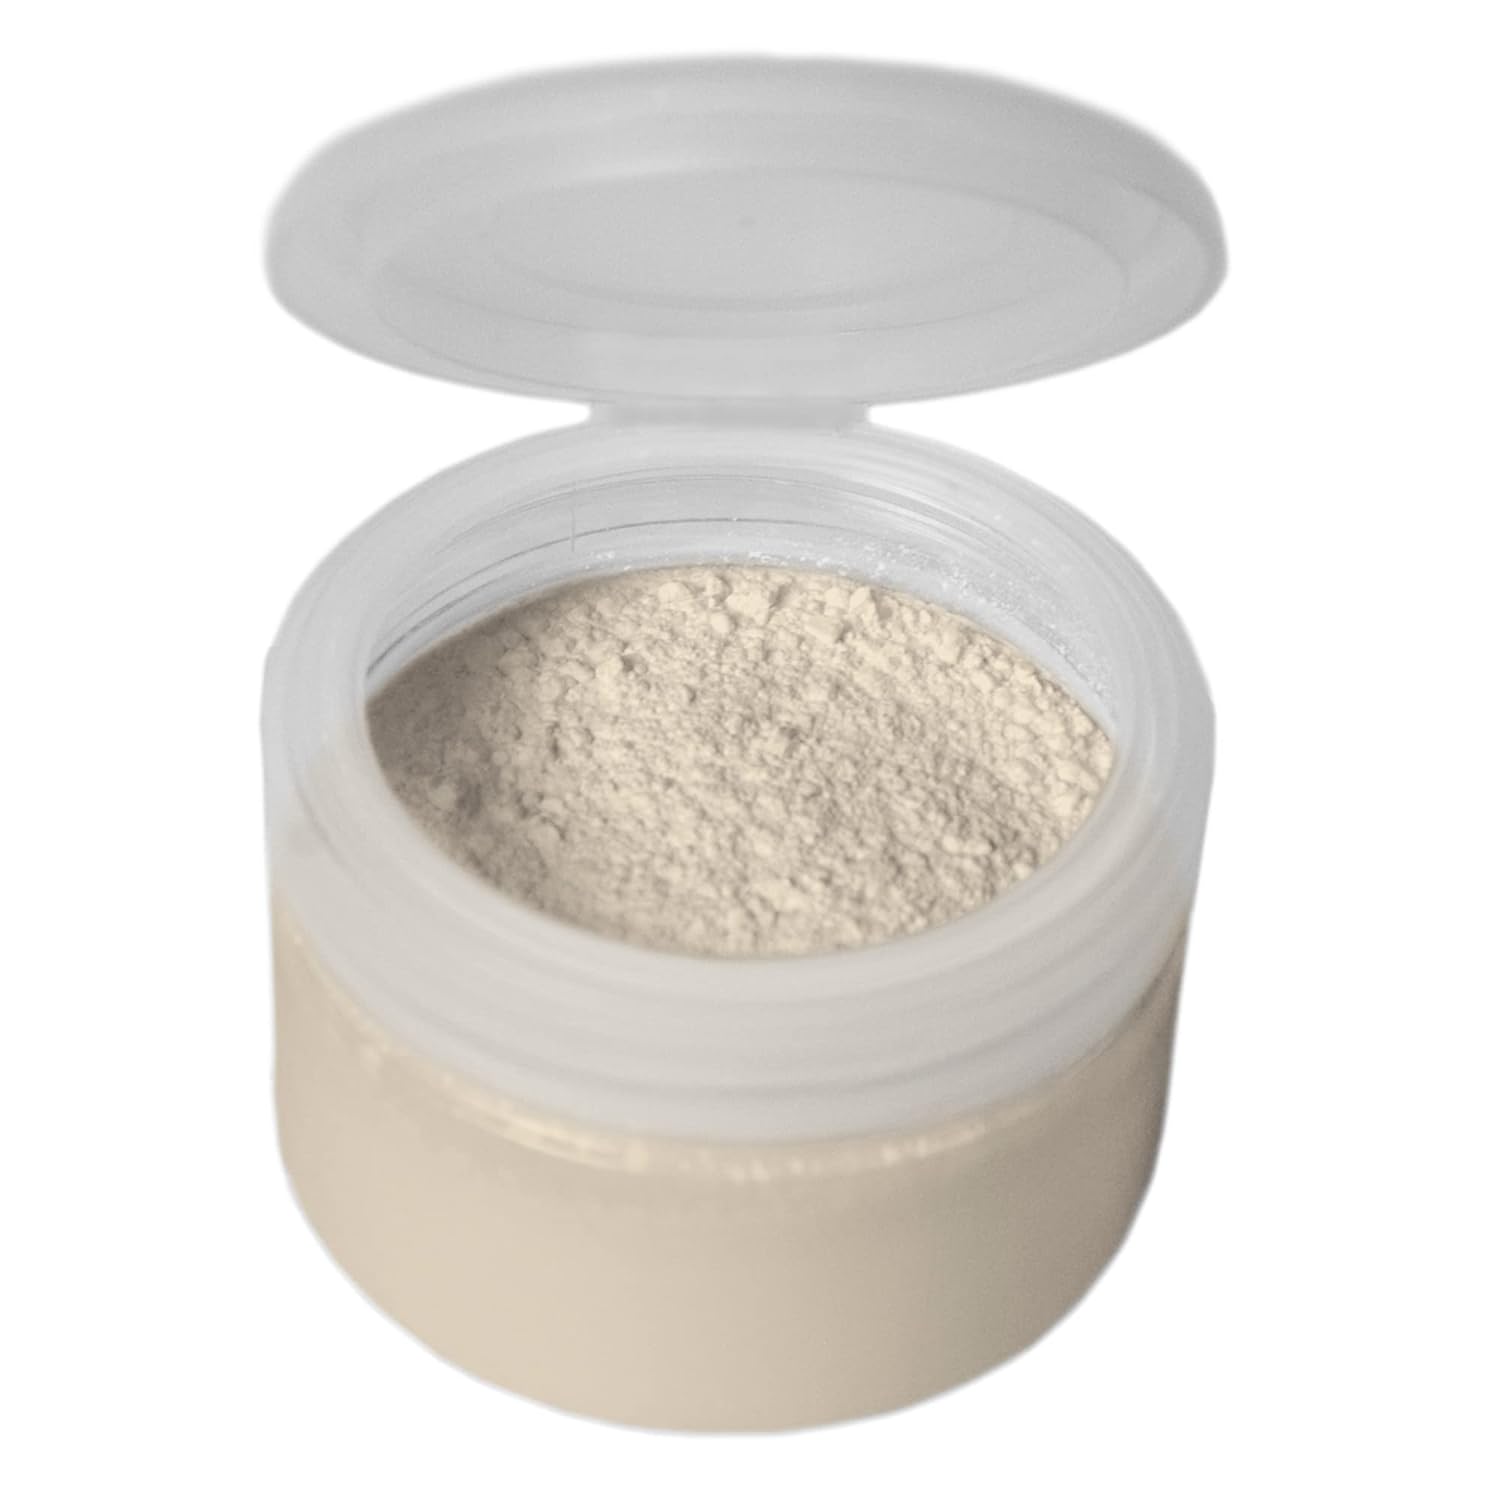 Grimas Colour Powder, Colour Beige 02, 50 g, Lightly Tinted, Water-Repellent Powder for Fixing, Leveling, Matting and Direct Application, Vegan, Unscented